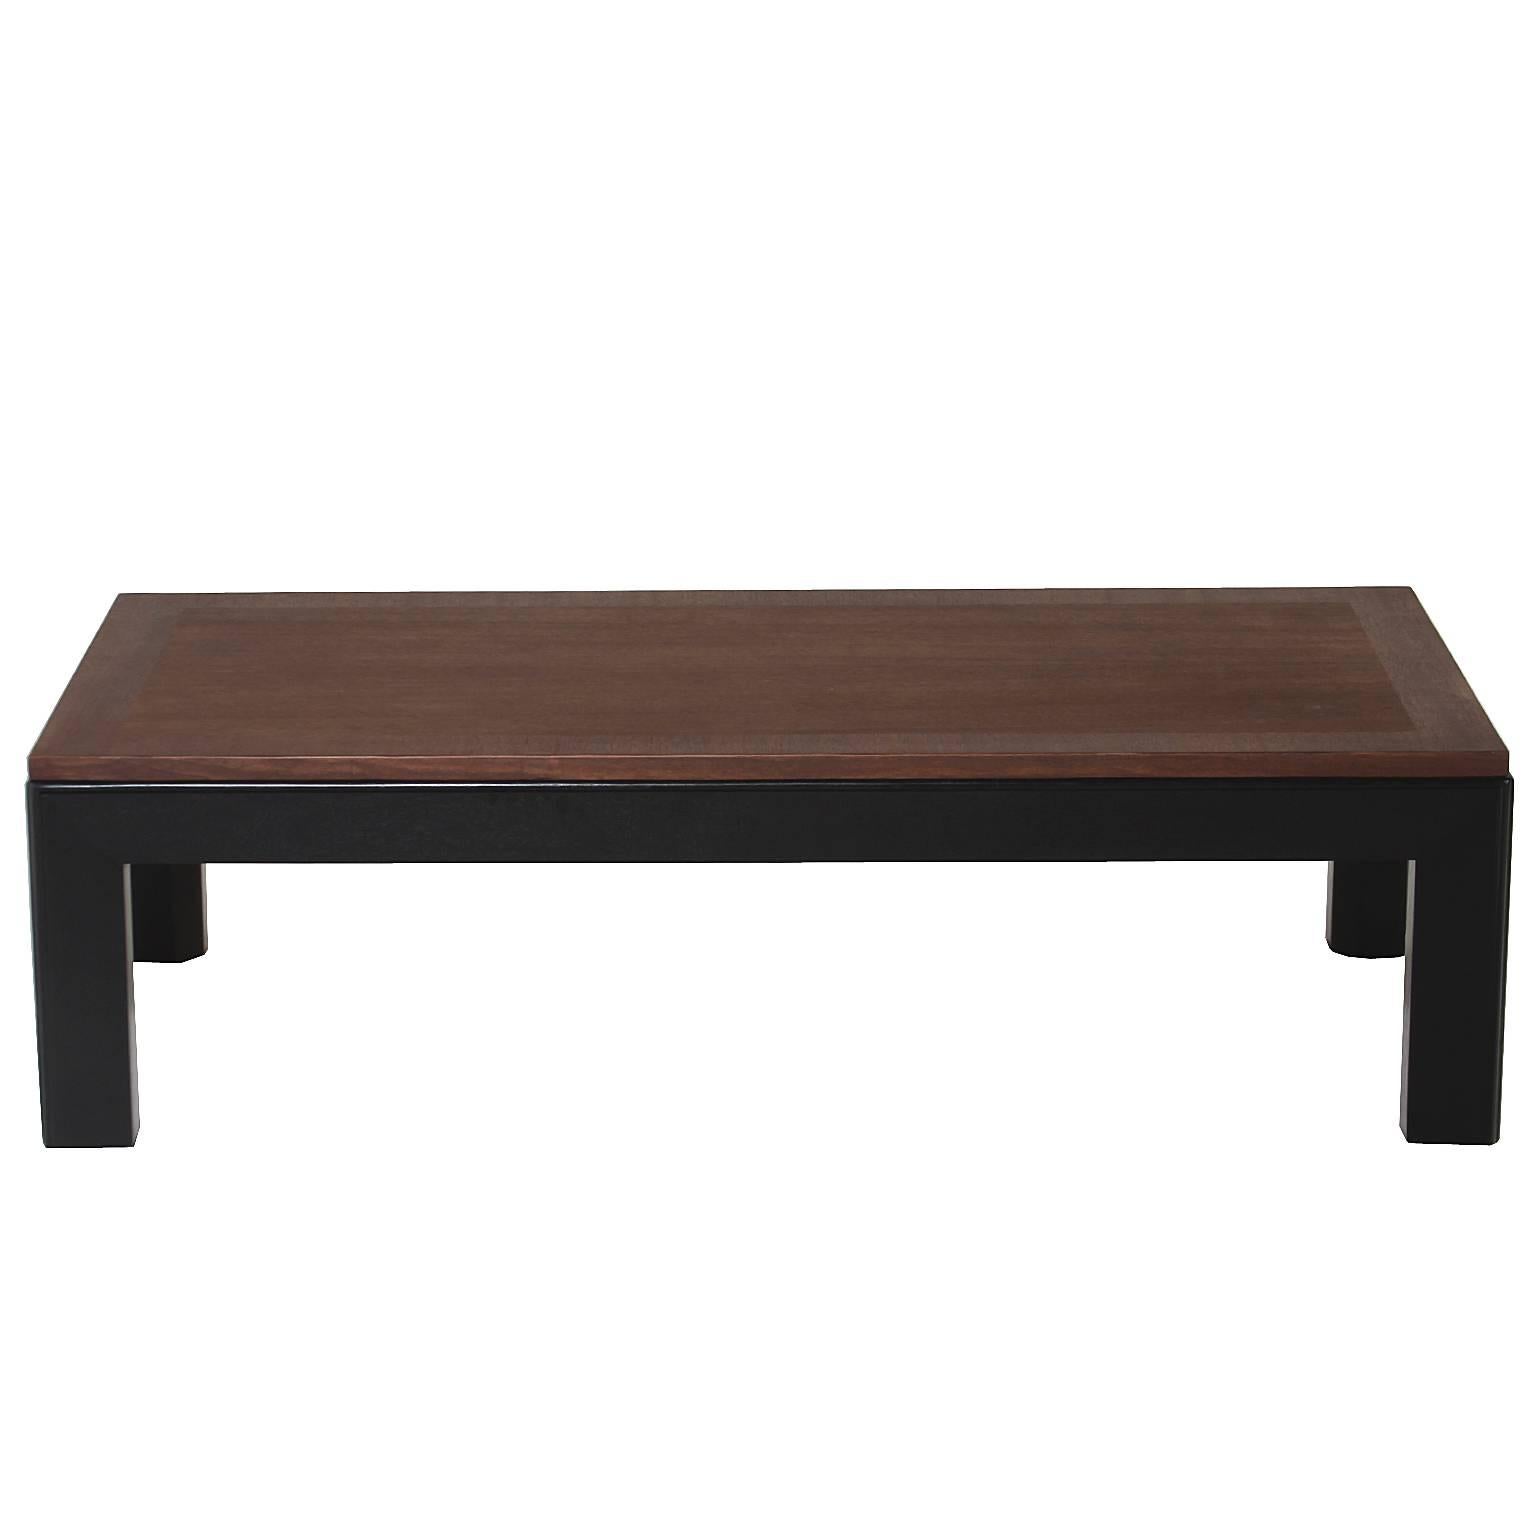 This Widdicomb rectangular coffee table has a newly finished mahogany top with a chocolate oil finish which sits upon an ebonized satin lacquer base. 

Many pieces are stored in our warehouse, so please click on 